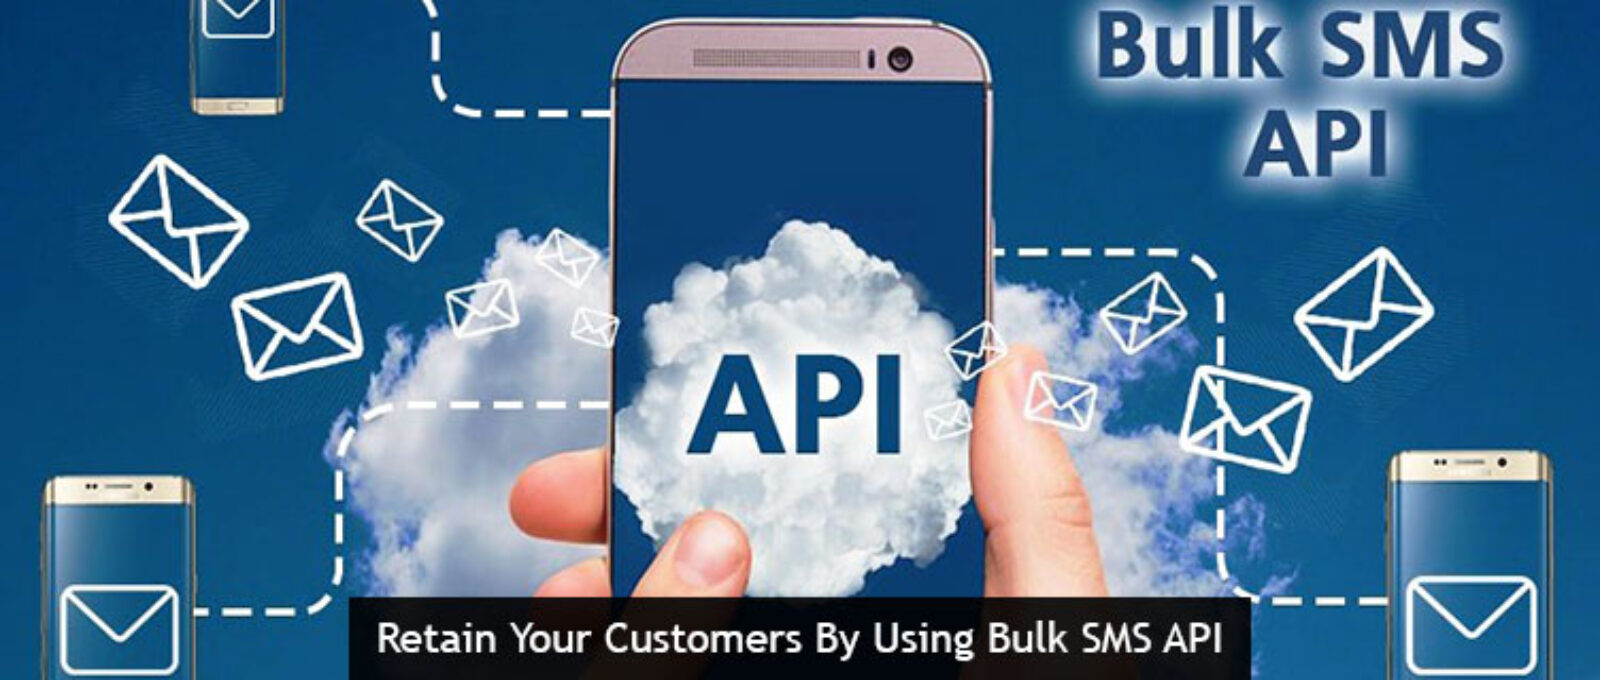 Retain Your Customers By Using Bulk SMS API